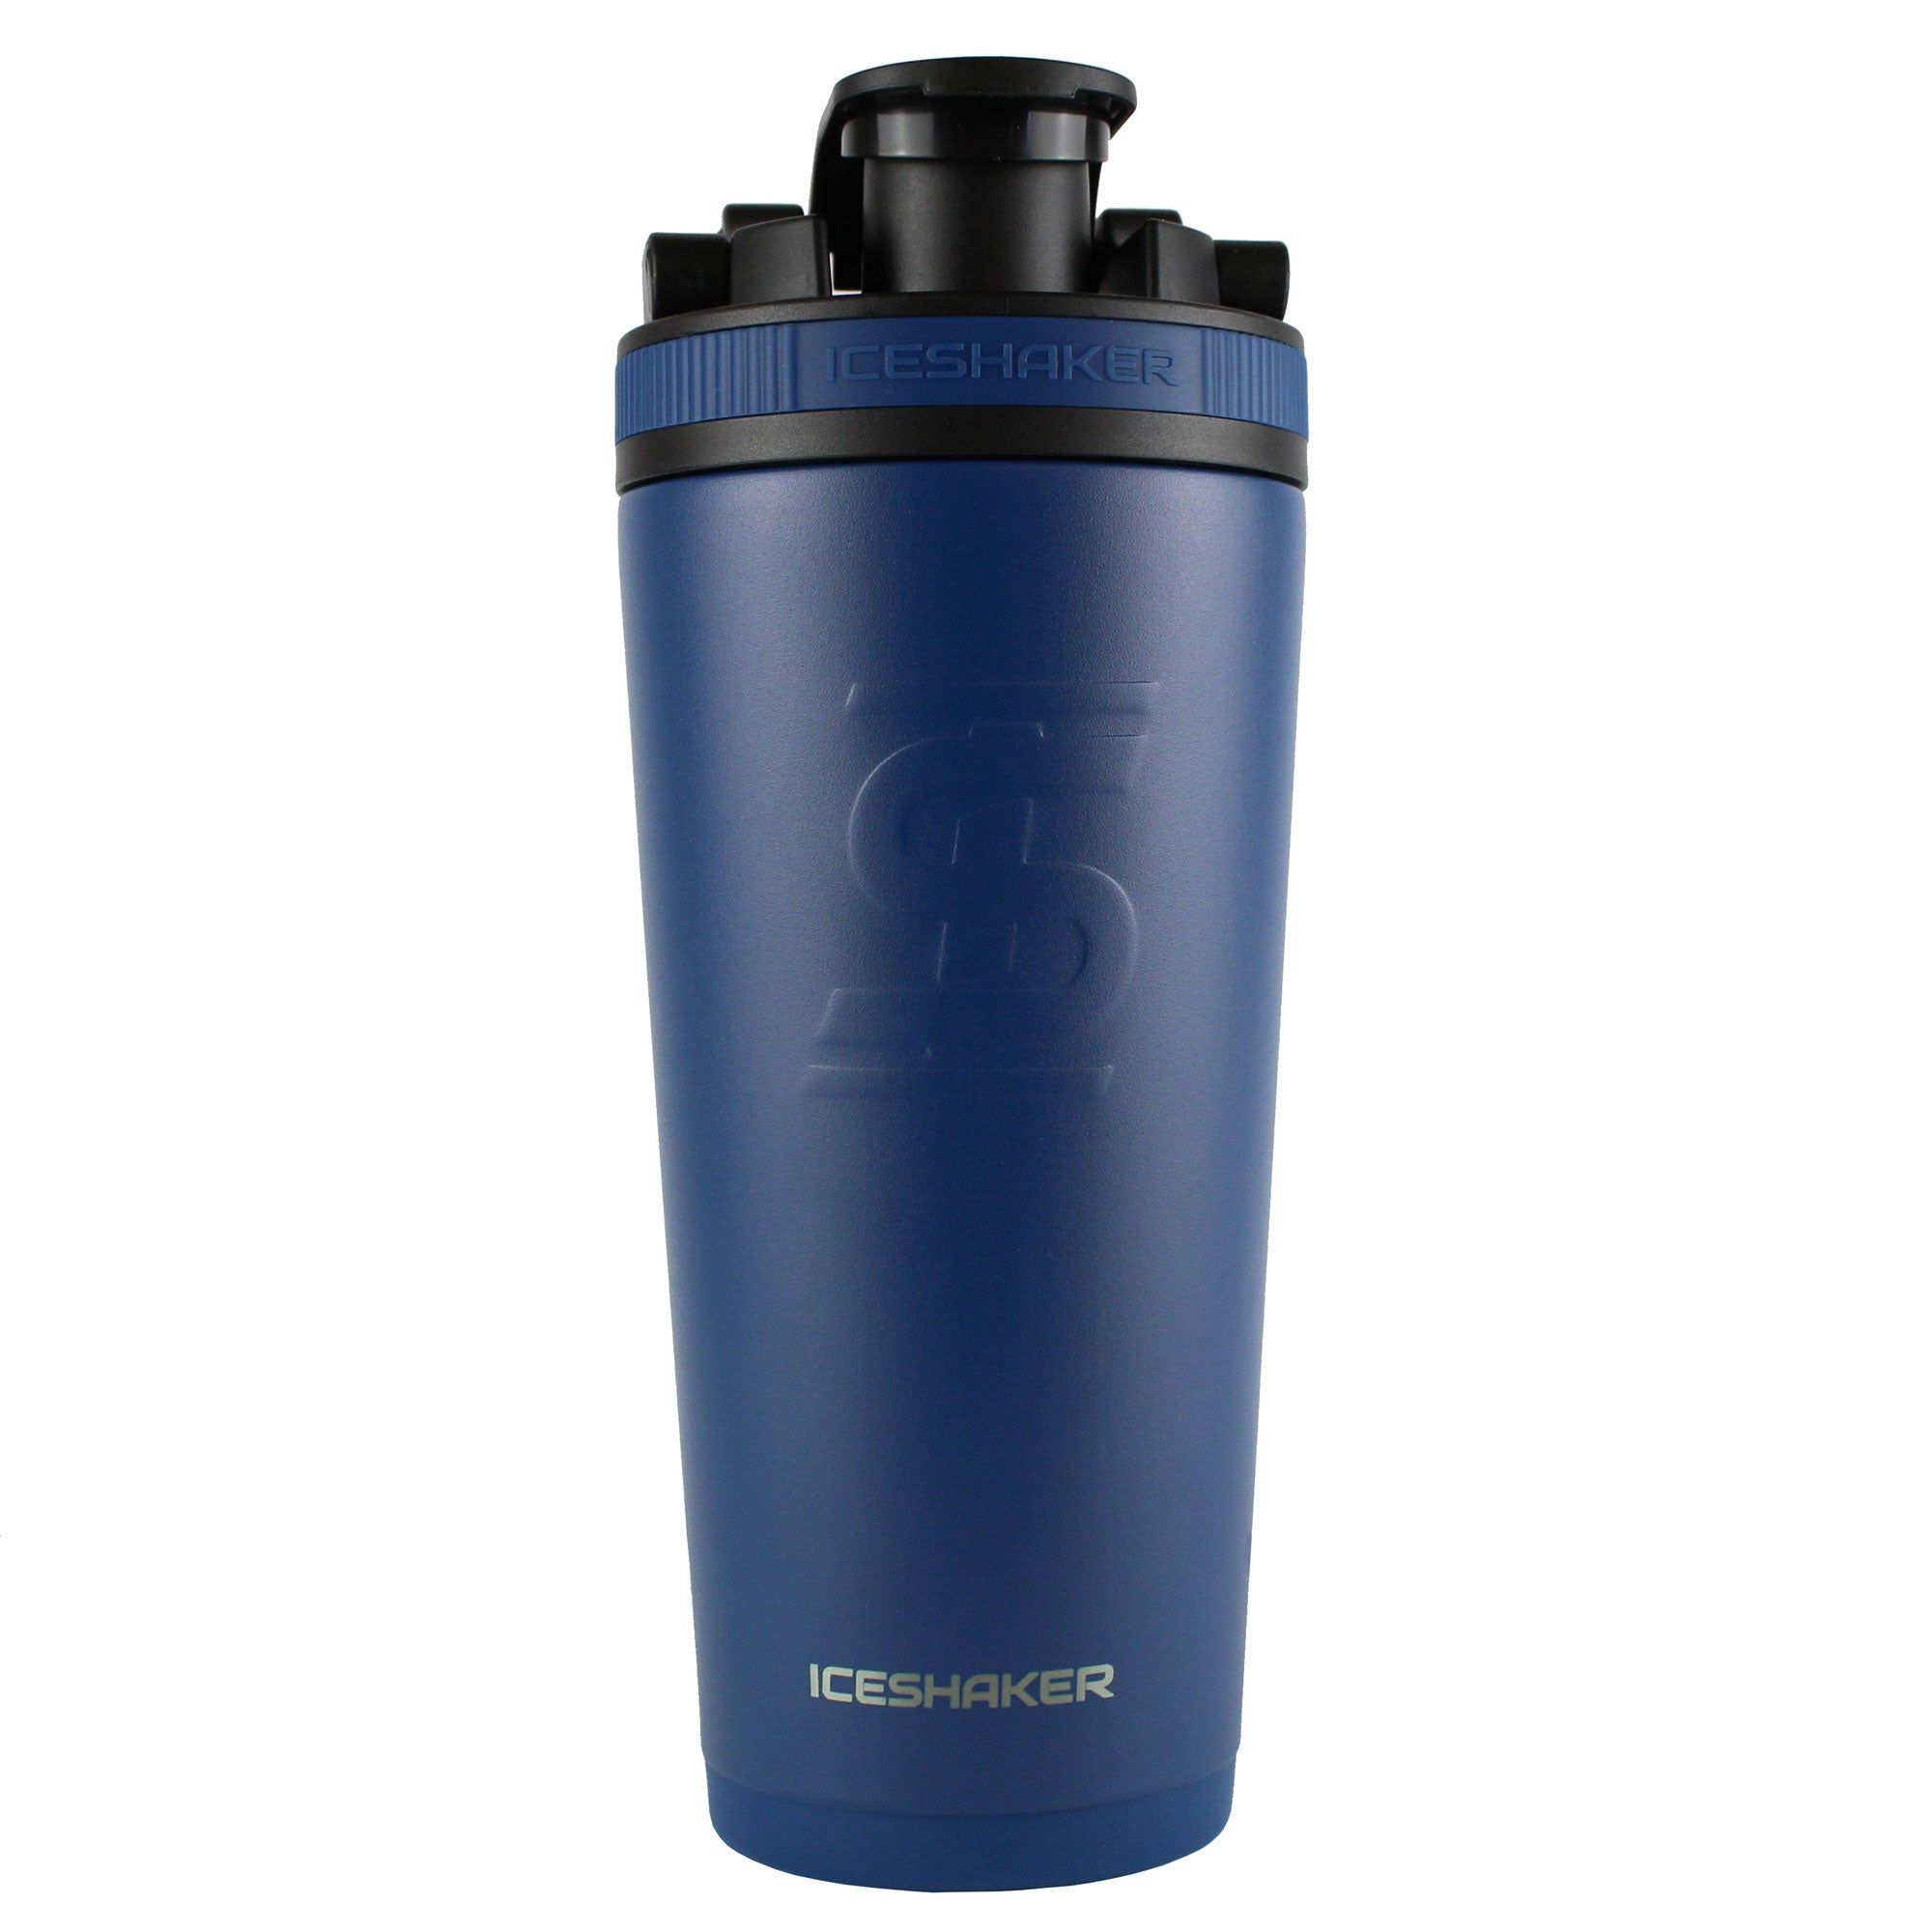 Ice Shaker: The Insulated Shaker Bottle That Keeps Your Drink Cold